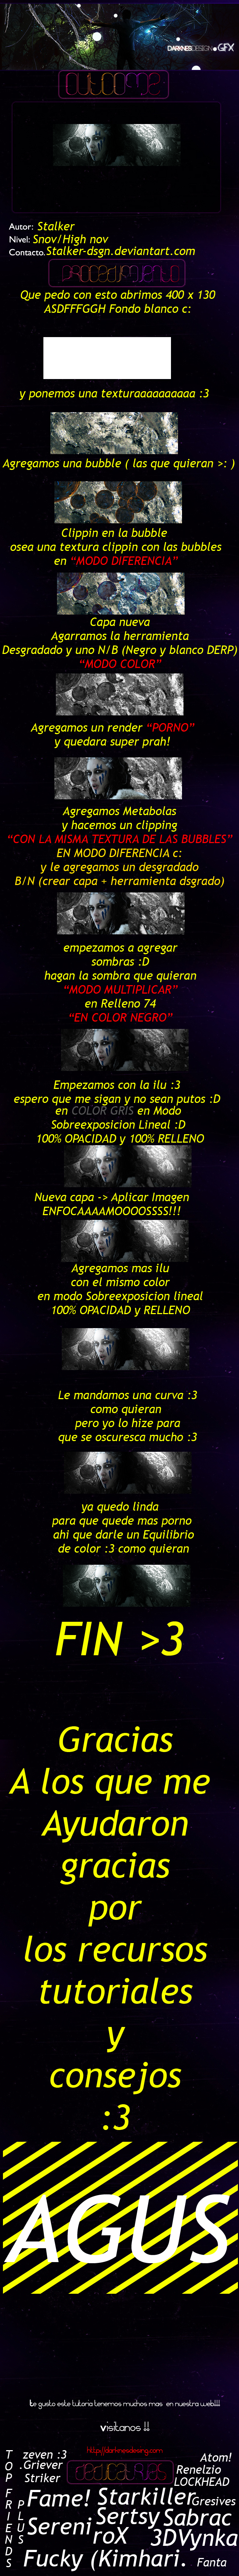 tutorial_focoz_by_stalker_dsgn-d4o5nw1.png